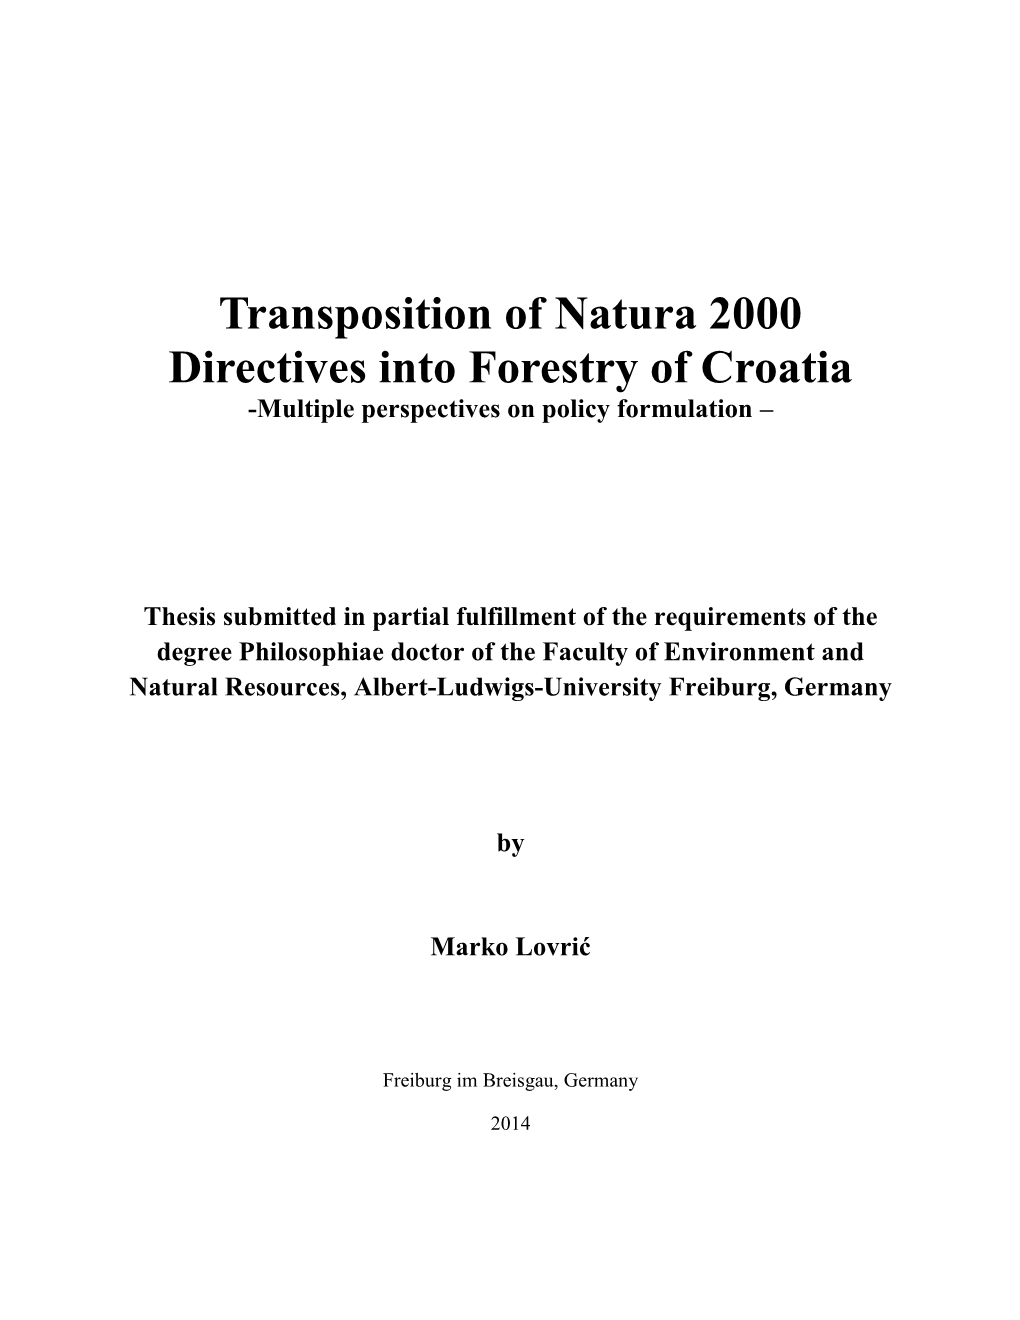 Transposition of Natura 2000 Directives Into Forestry of Croatia